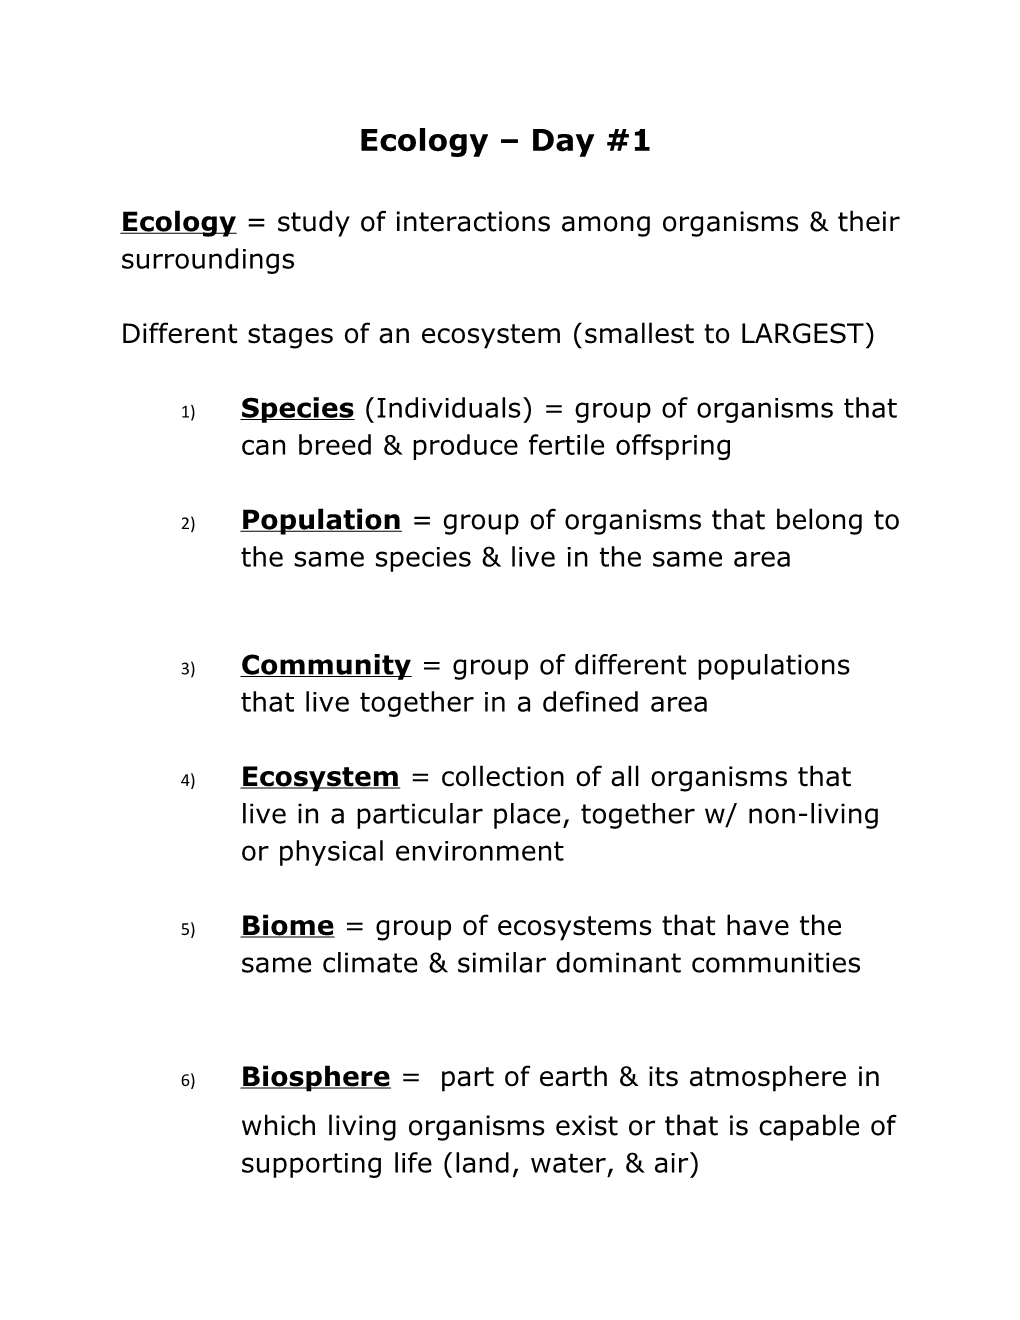 Ecology = Study of Interactions Among Organisms & Their Surroundings